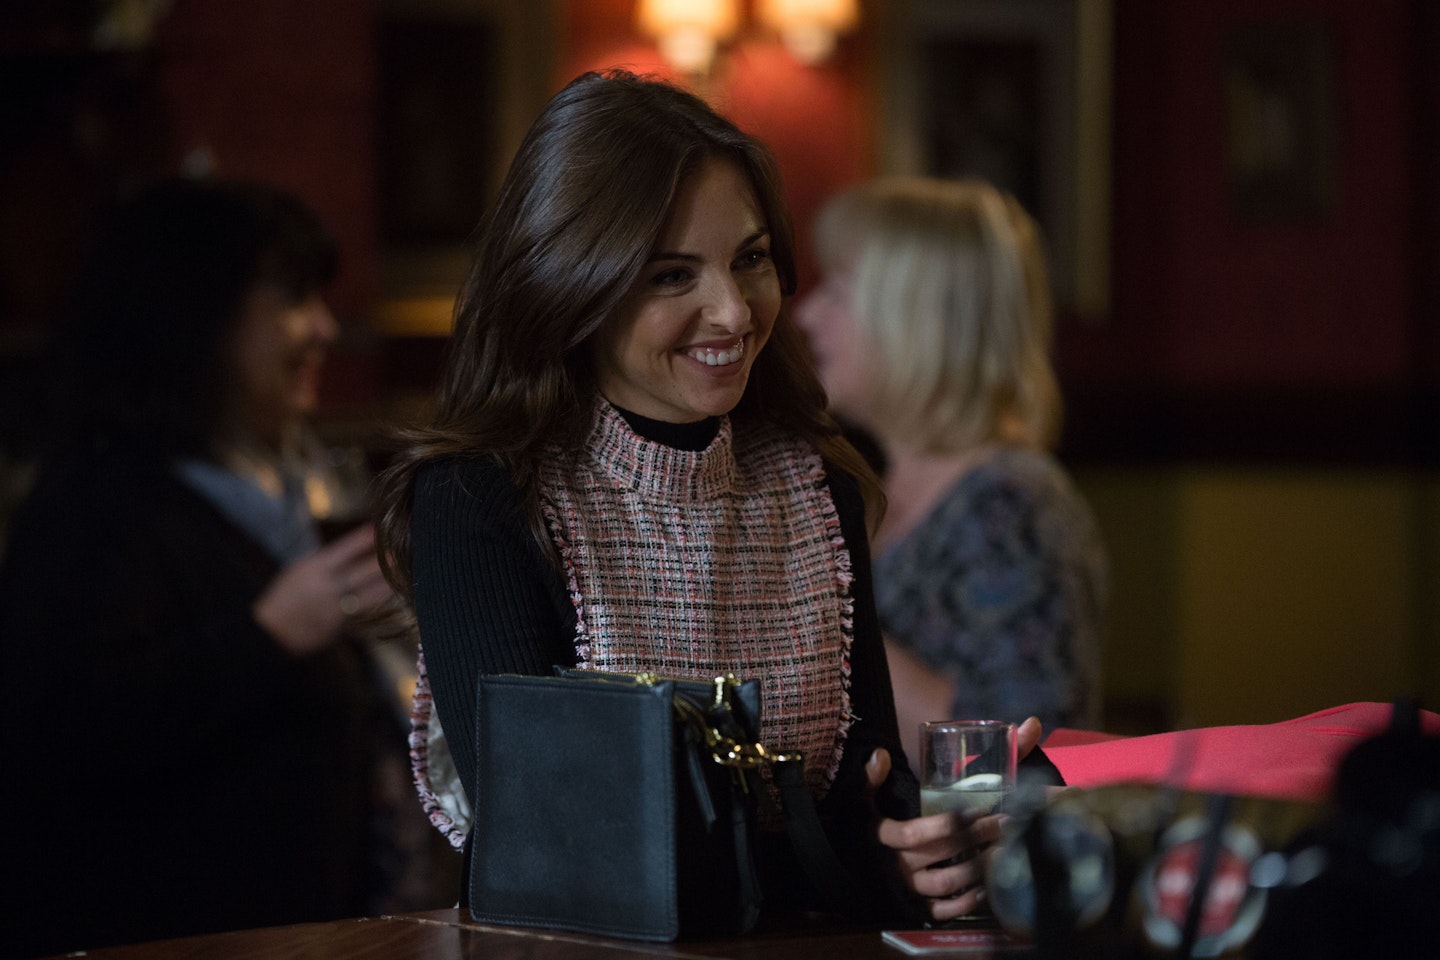 eastenders ruby allen and jay brown relationship